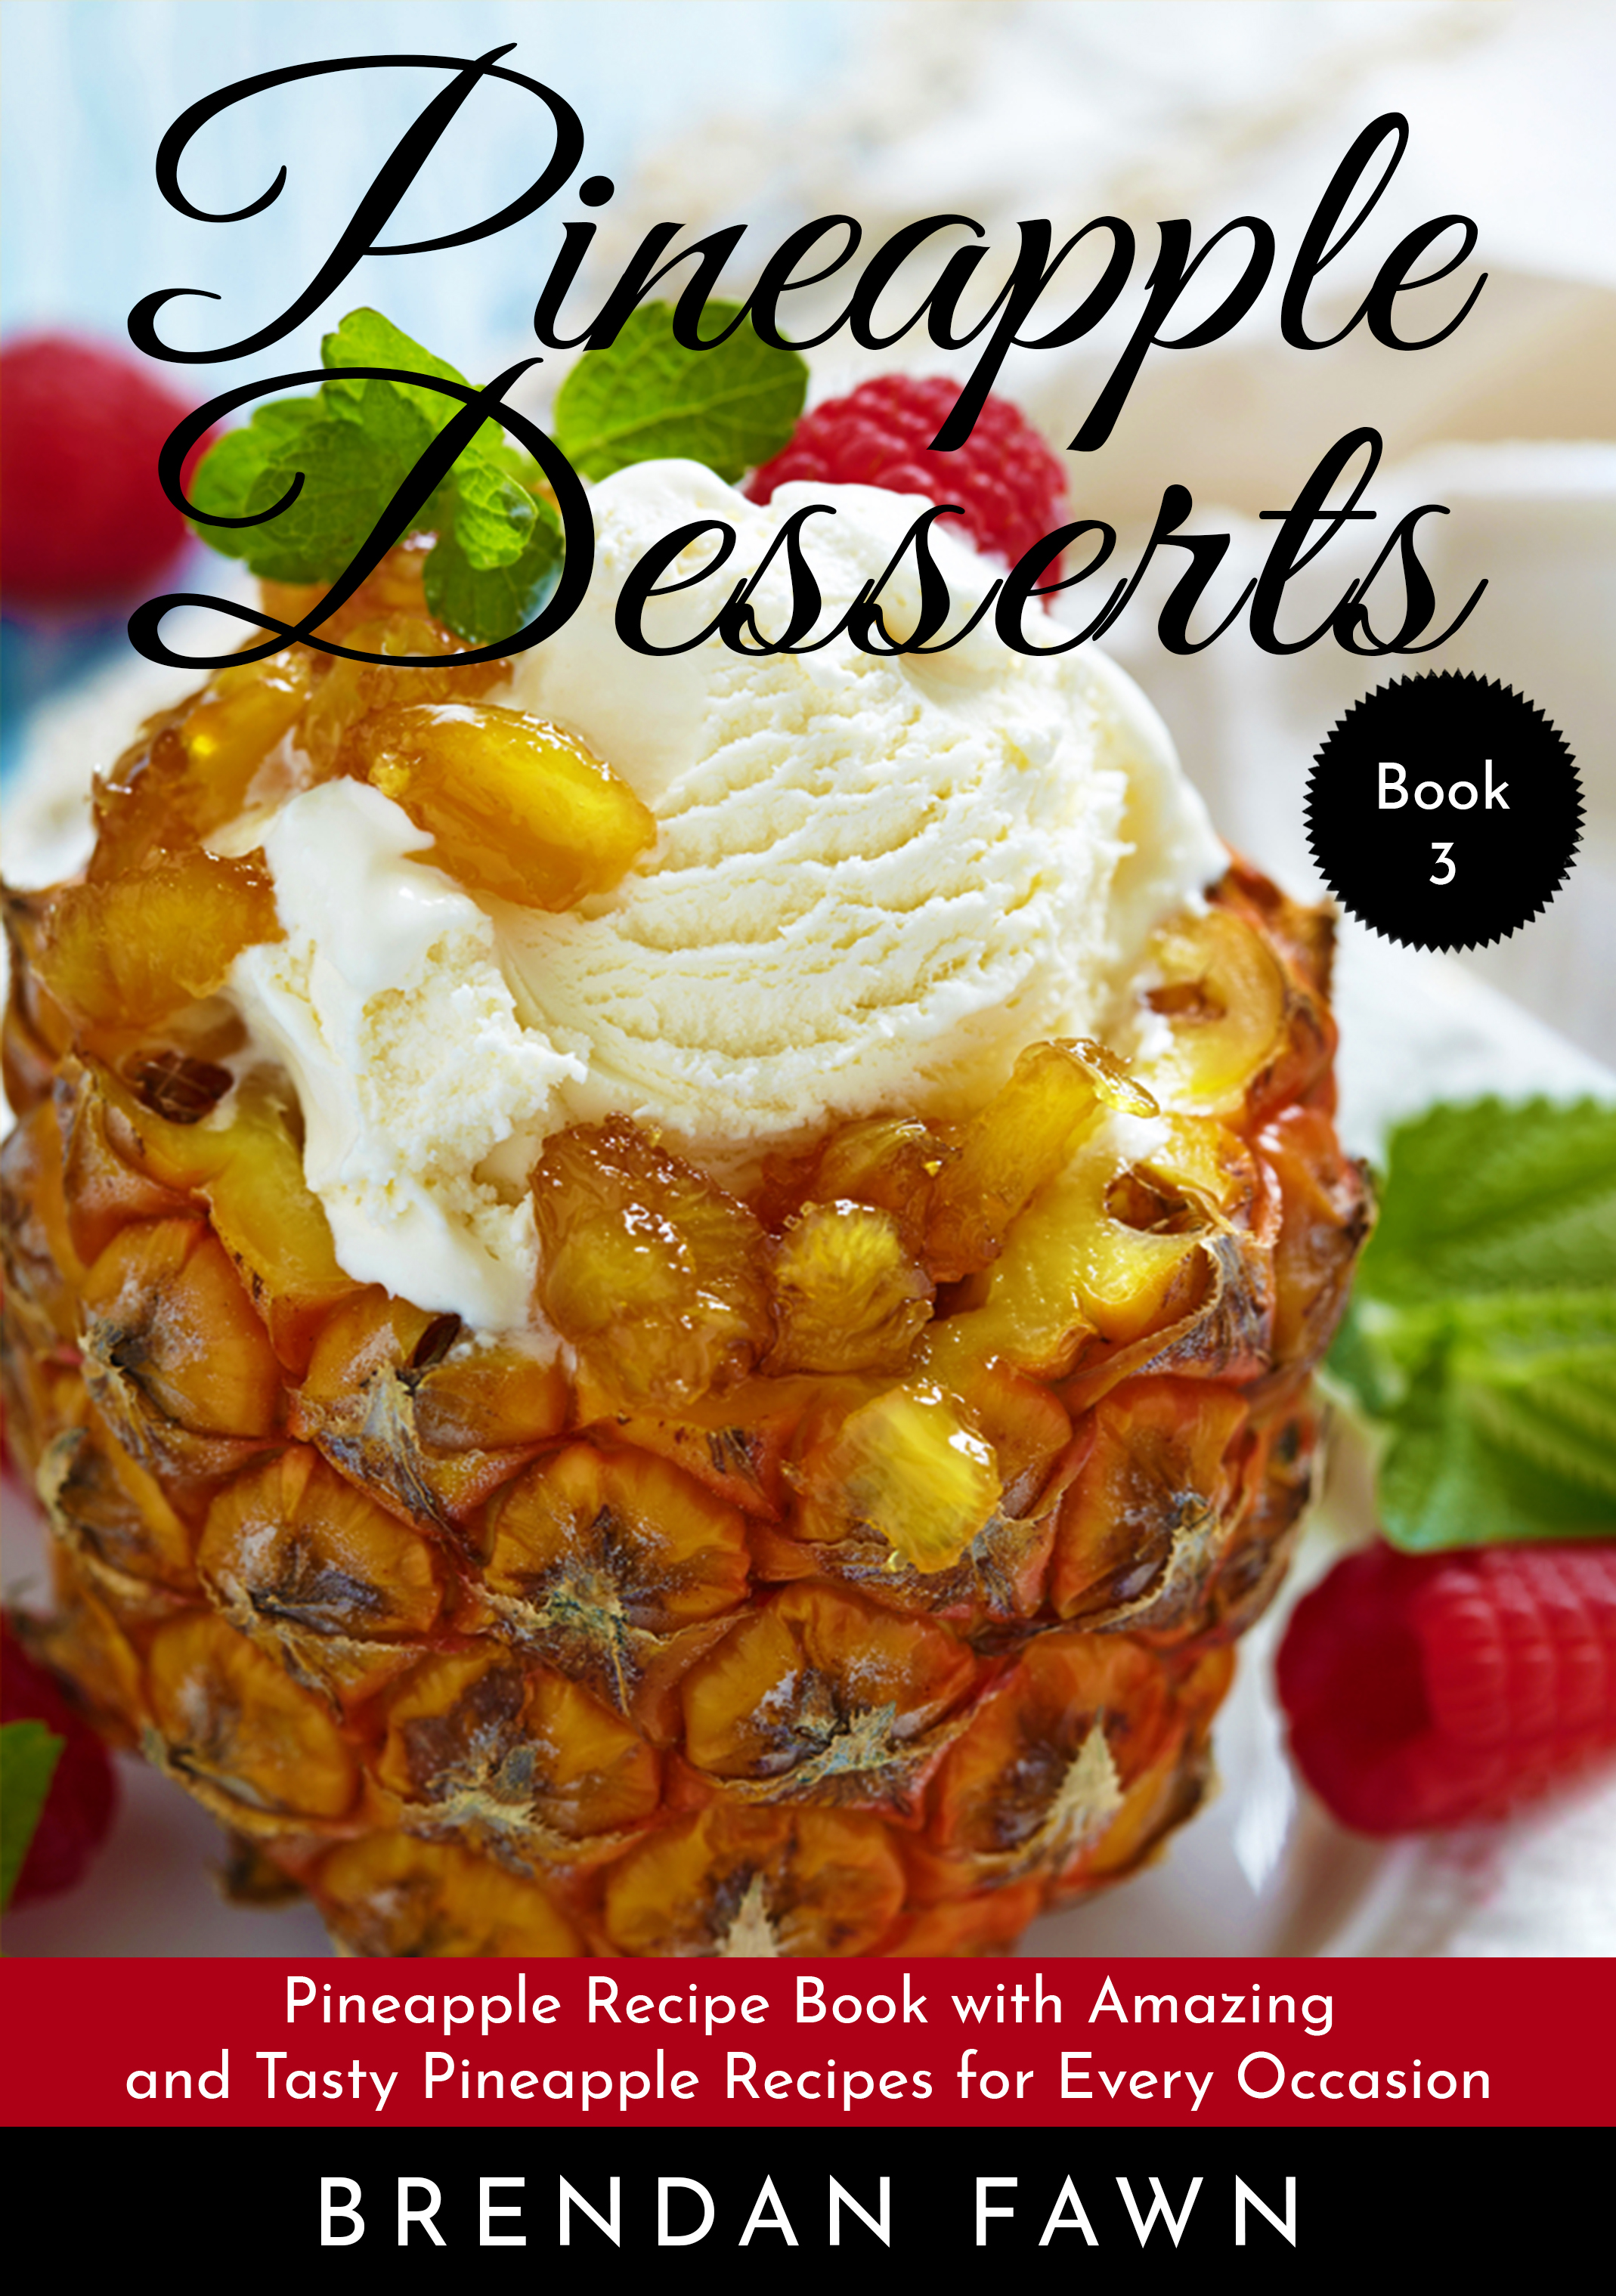 FREE: Pineapple Desserts: Pineapple Recipe Book with Amazing and Tasty Pineapple Recipes for Every Occasion by Brendan Fawn